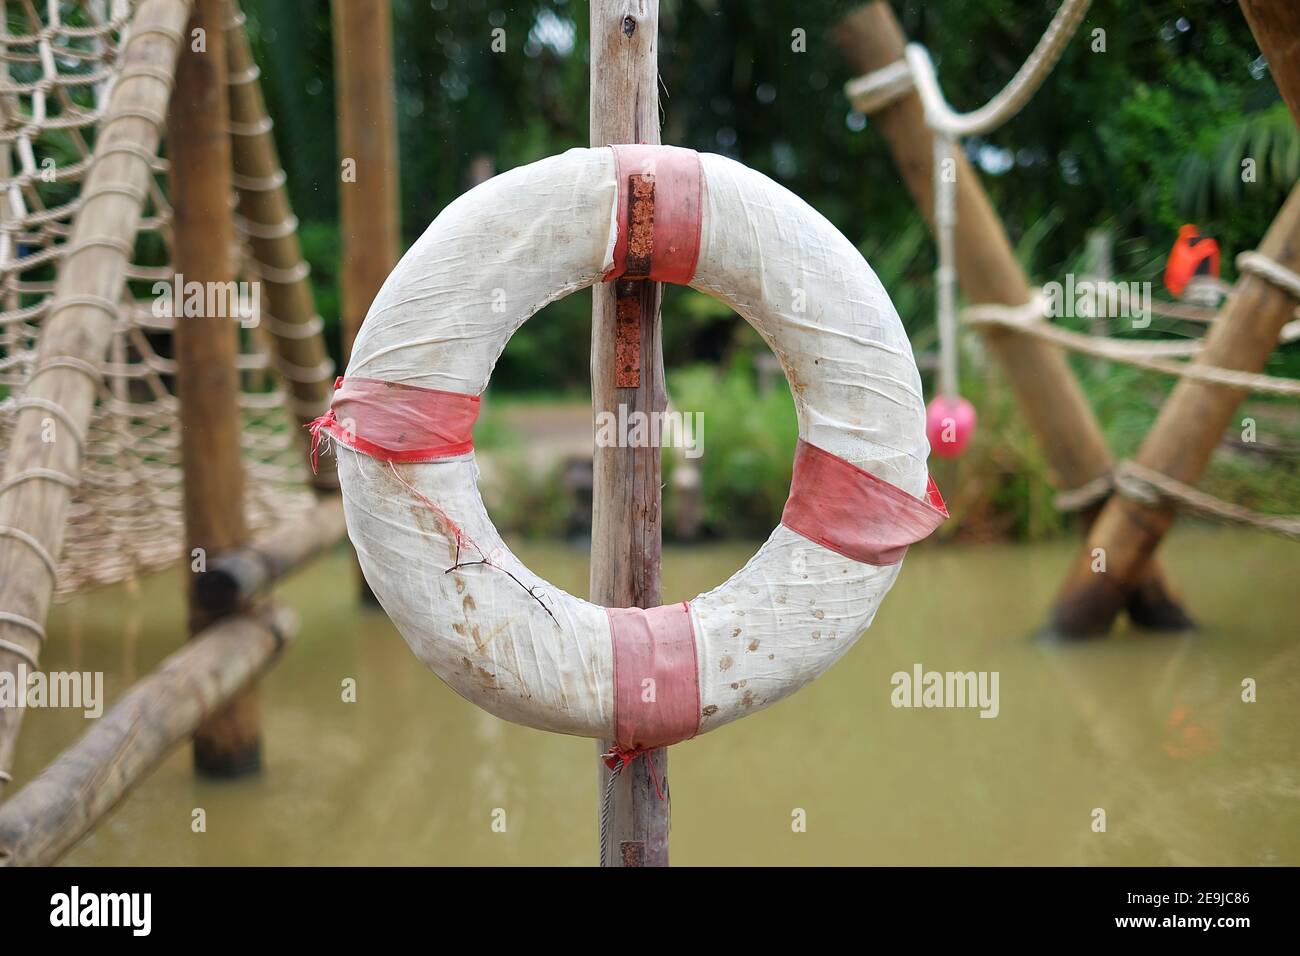 A white and red lifeguard floater hanging on a stick by a river bank. Stock Photo